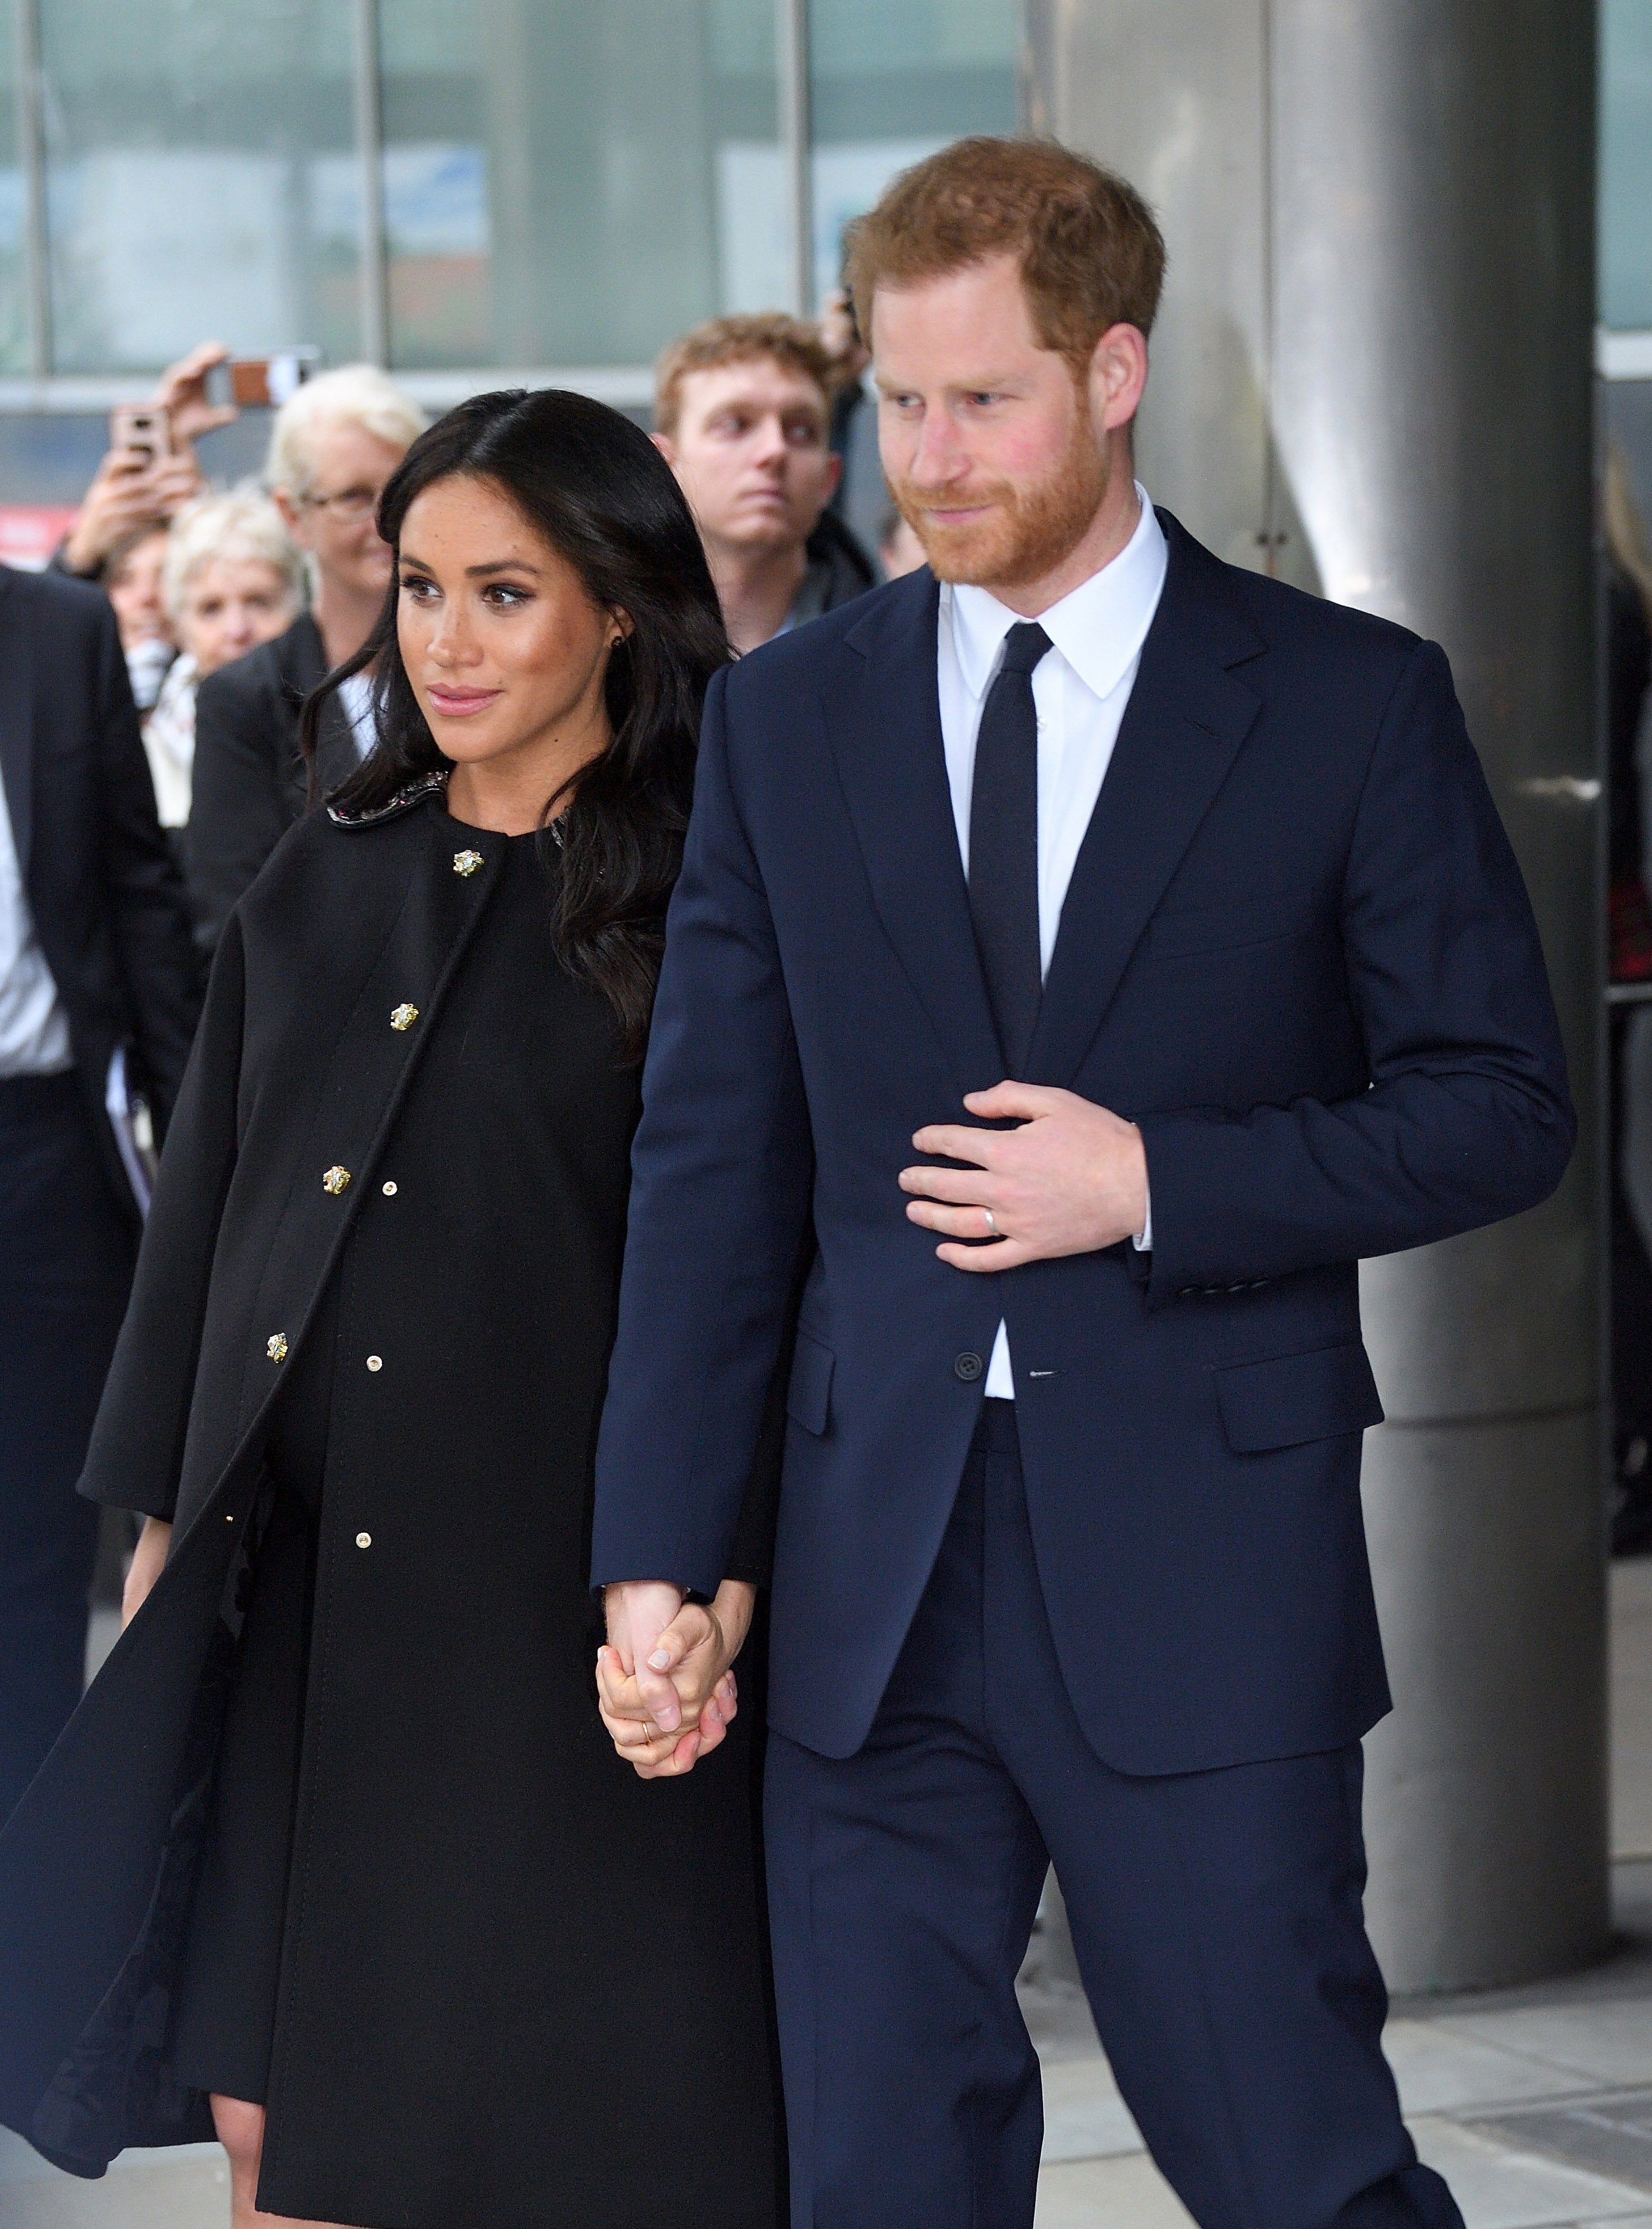 Prince Harry and Meghan of Sussex depart New Zealand House after signing the book of condolence following the recent terror attack, which saw at least 50 people killed at a Mosque in Christchurch on March 19, 2019, in London, England. | Source: Getty Images